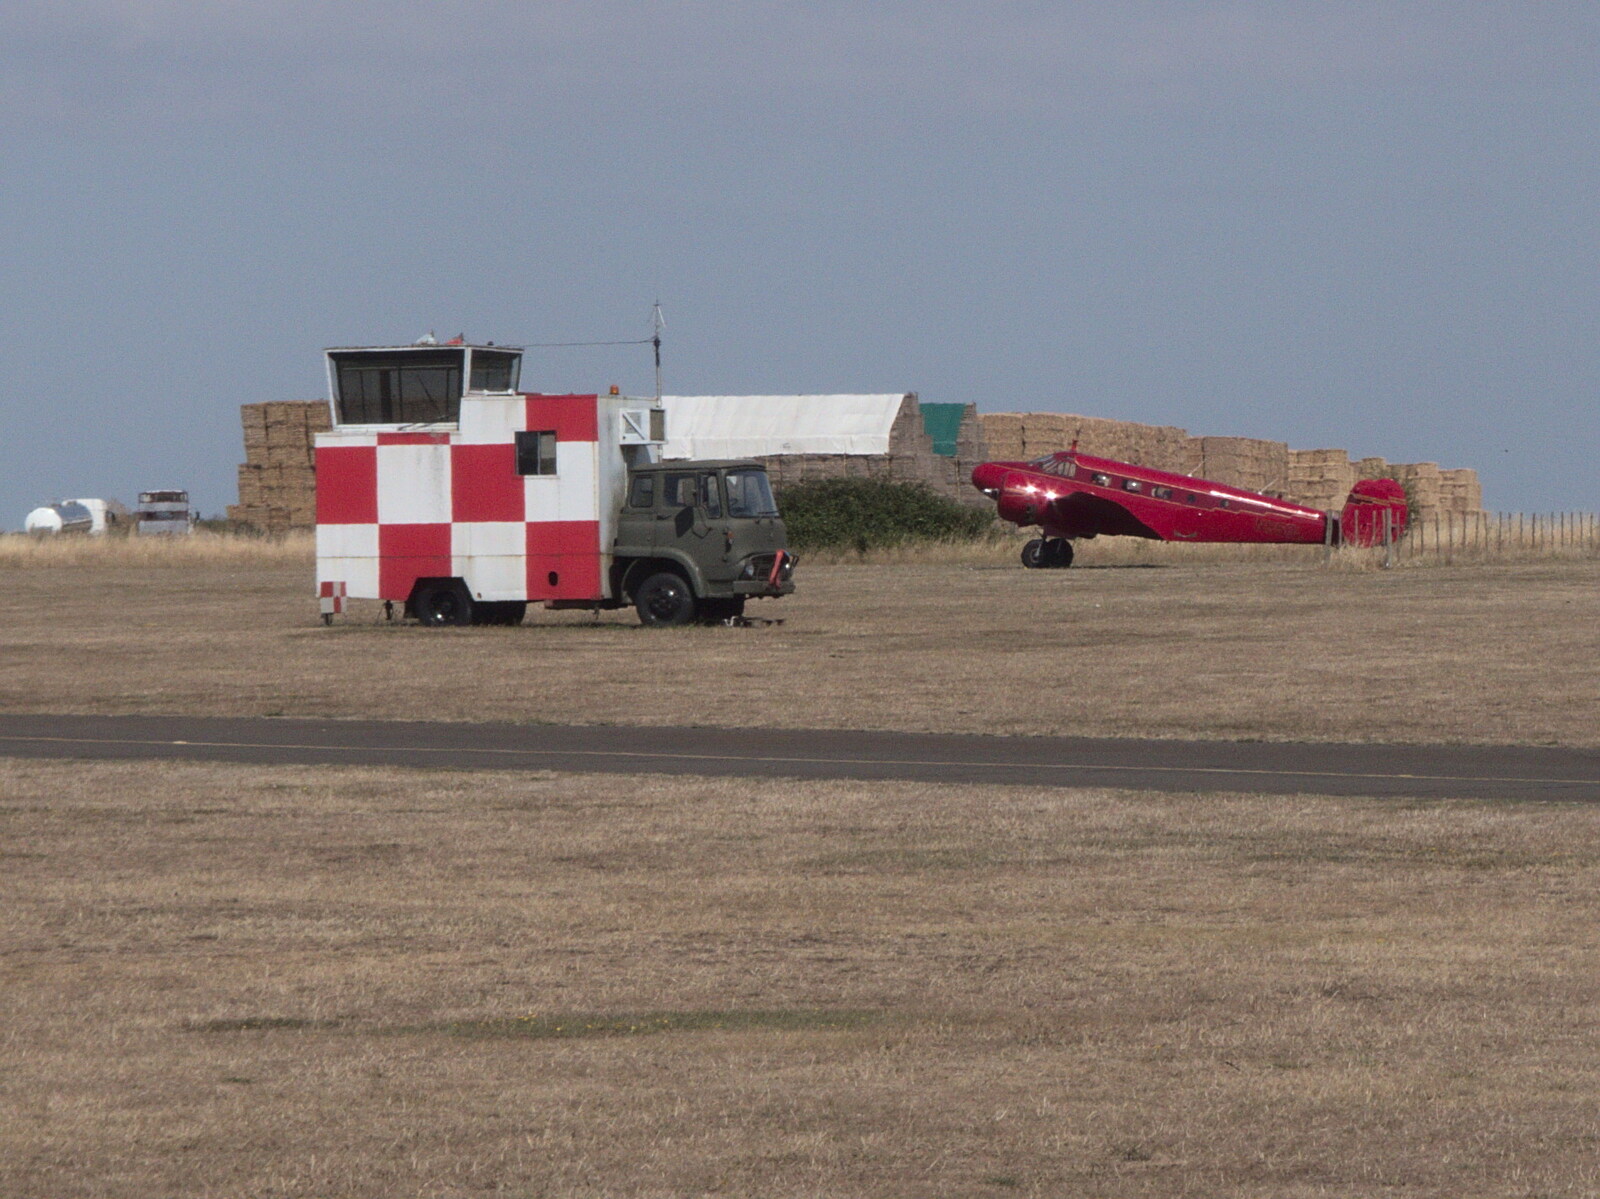 There's a nice old plane out by the mobile tower from A Trip to Old Buckenham Airfield, Norfolk - 6th August 2022